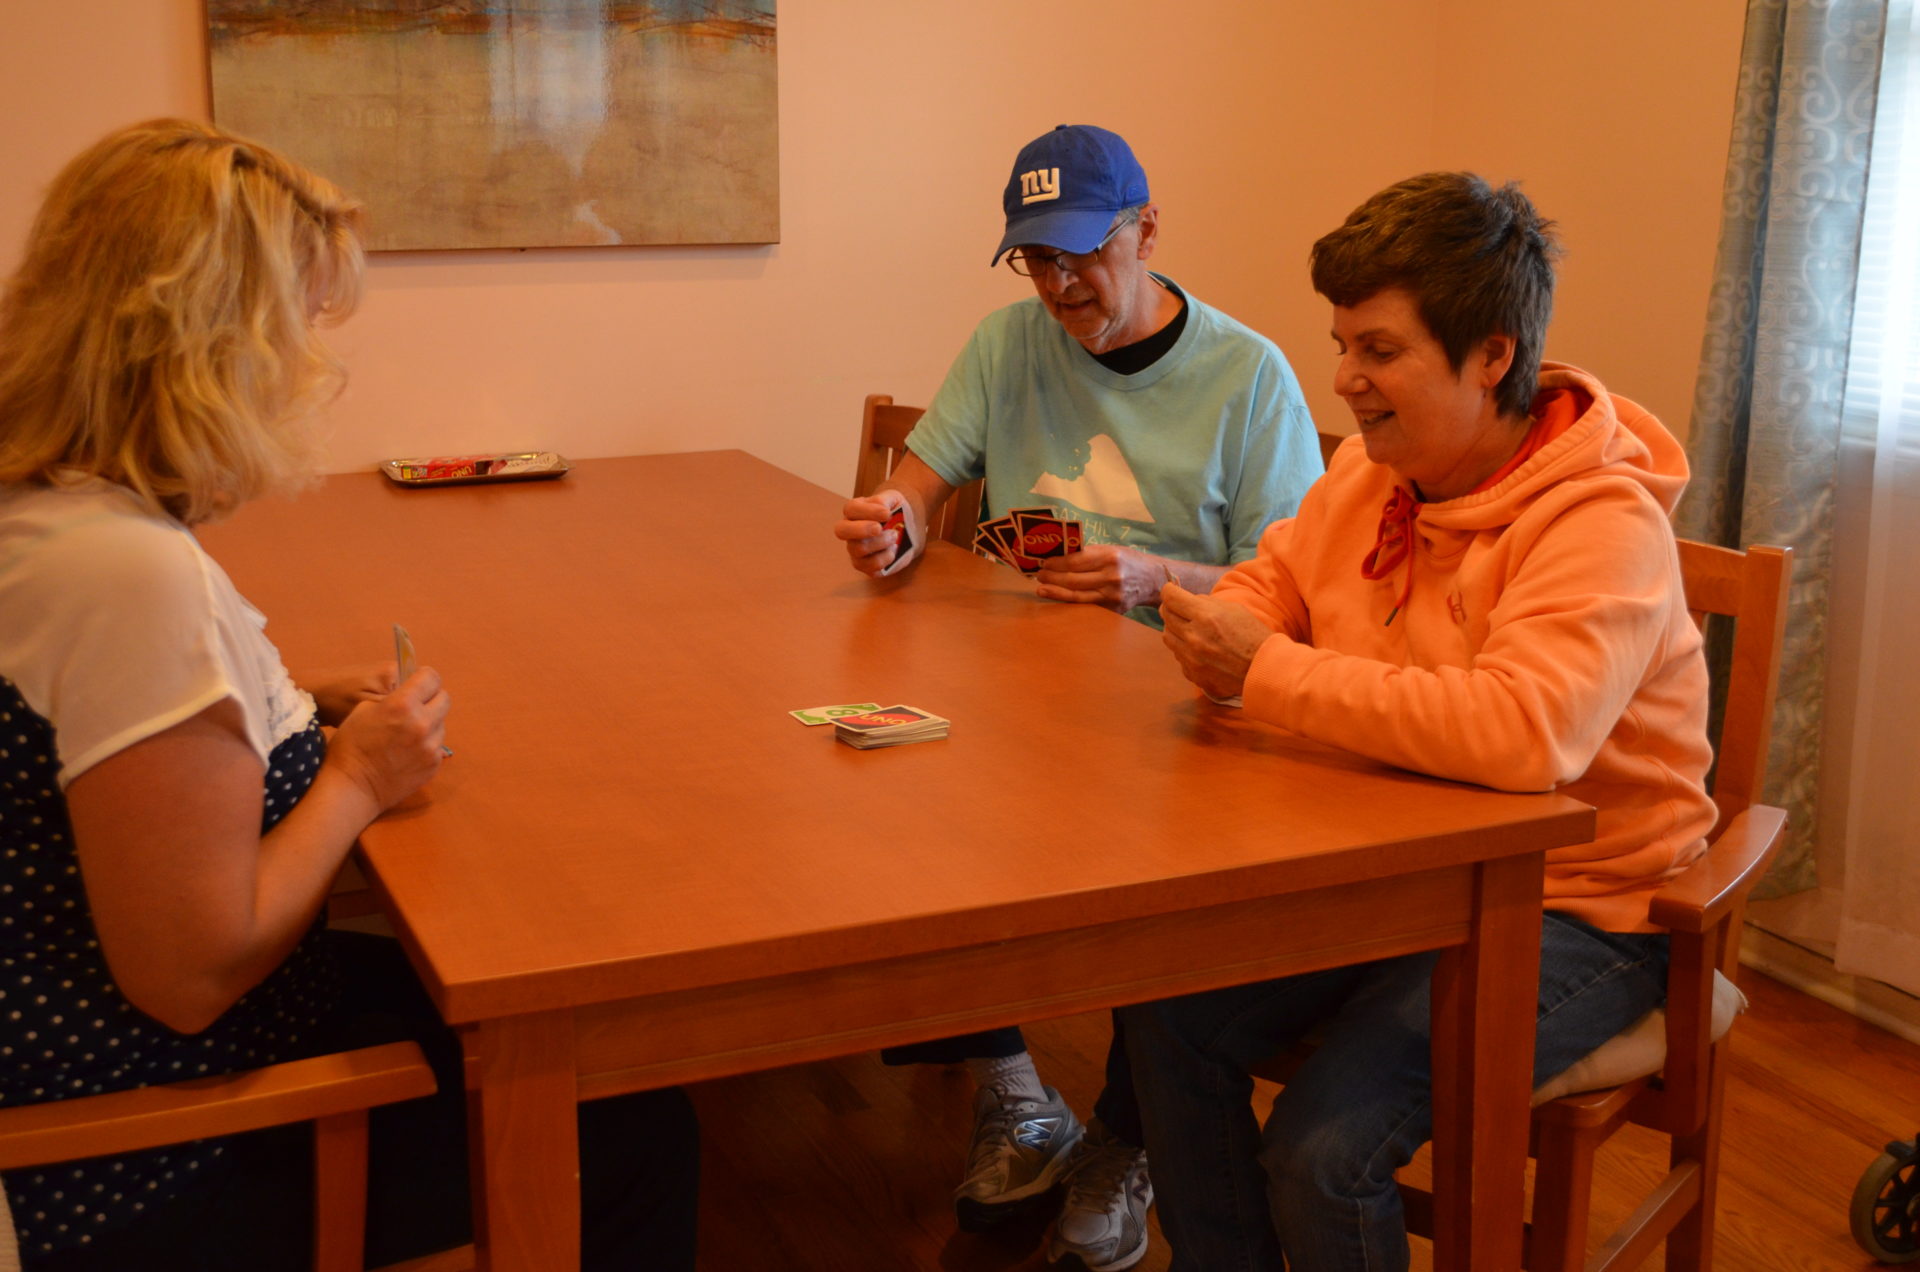 One older man and two older women playing Uno at a wooden table. Older man is wearing a New York Giants hat